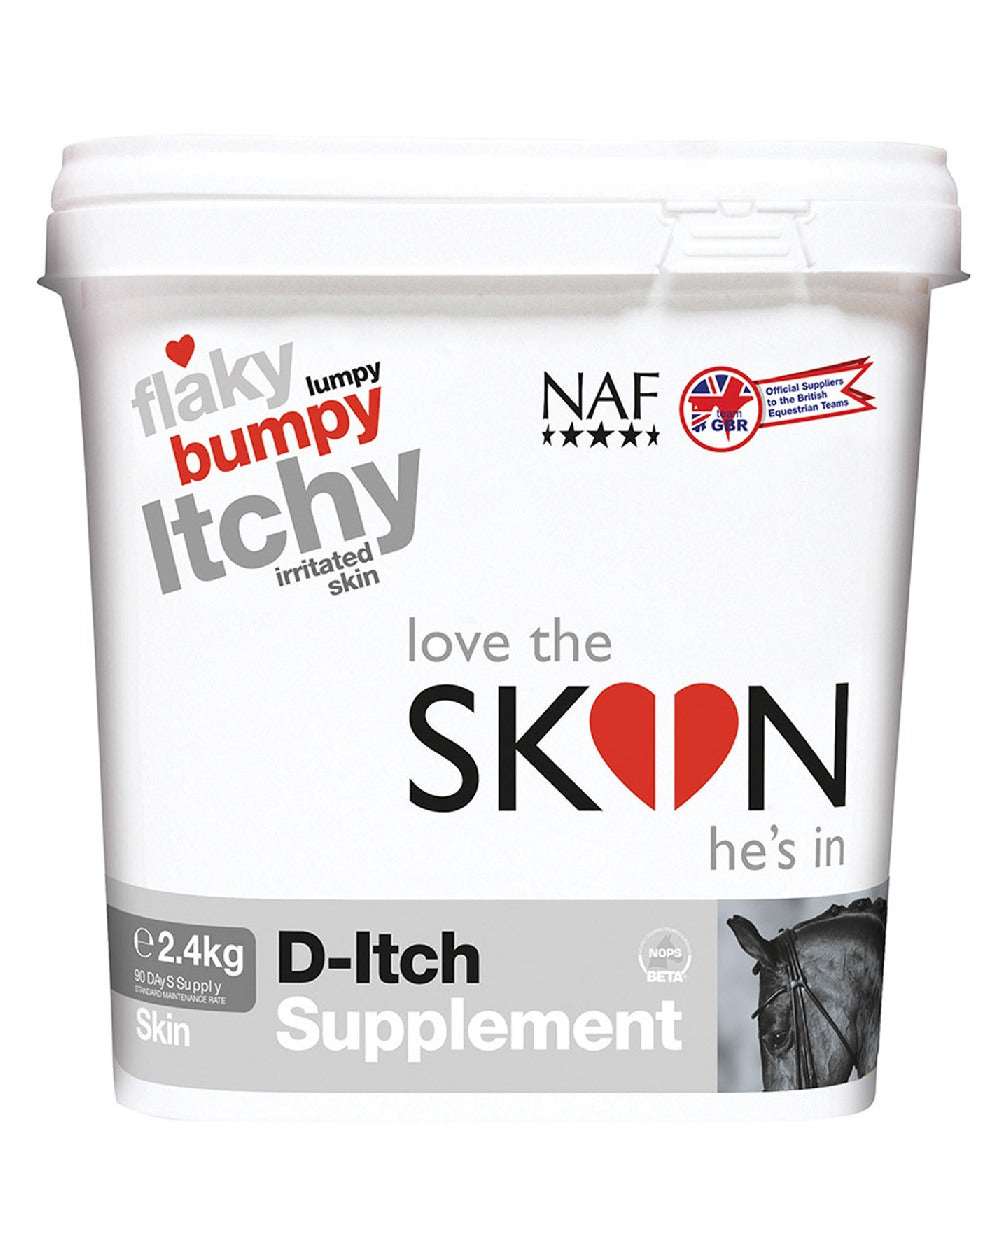 NAF Love The Skin Hes In D-Itch Supplement 2.4kg on white background